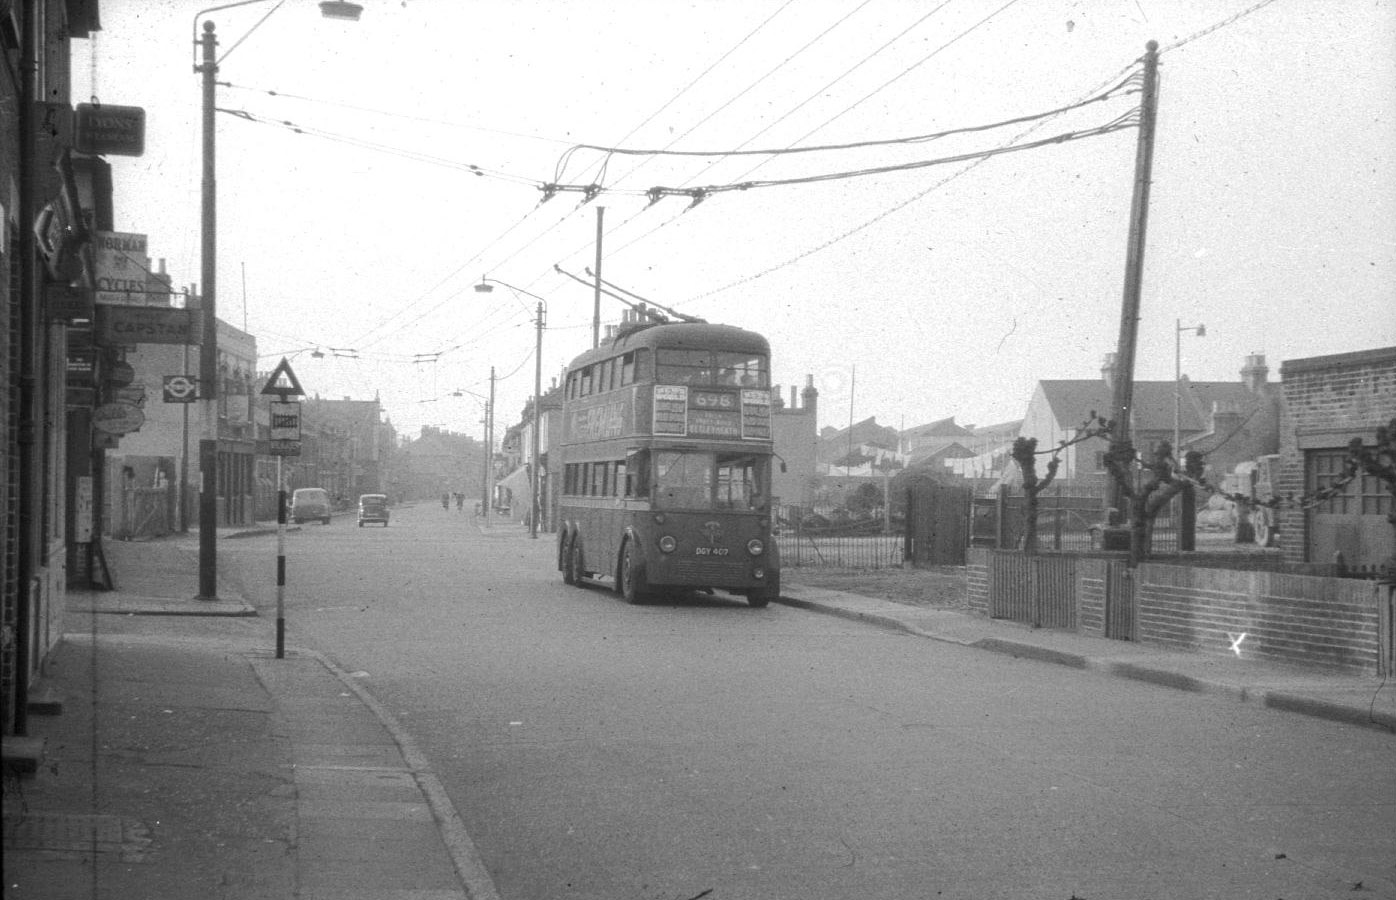 West street, Erith, 1959Picture by David Bradley